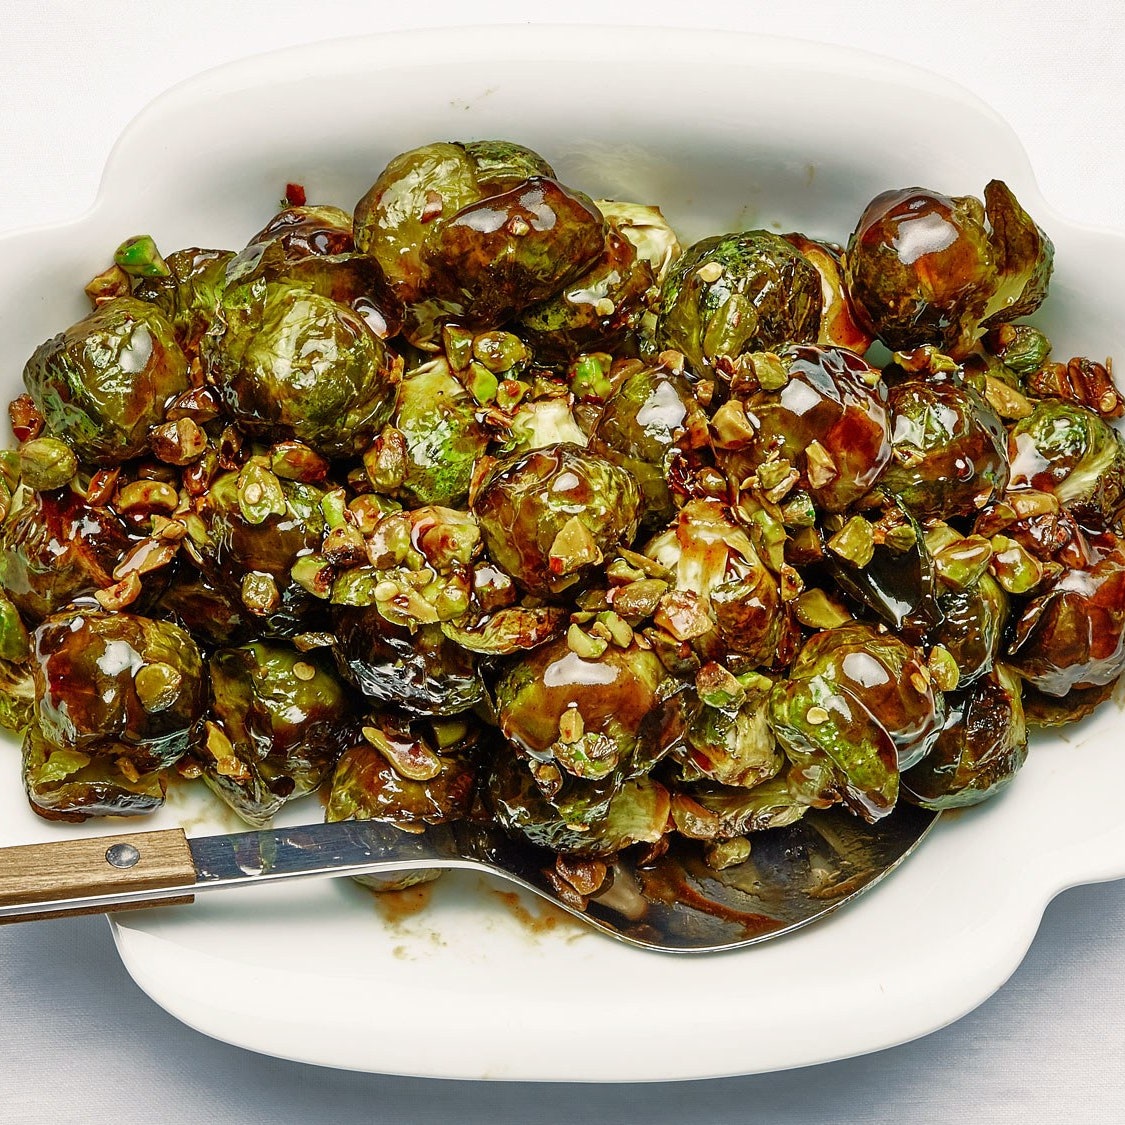 31 Brussels Sprouts Recipes for People Who Love Little Cabbages